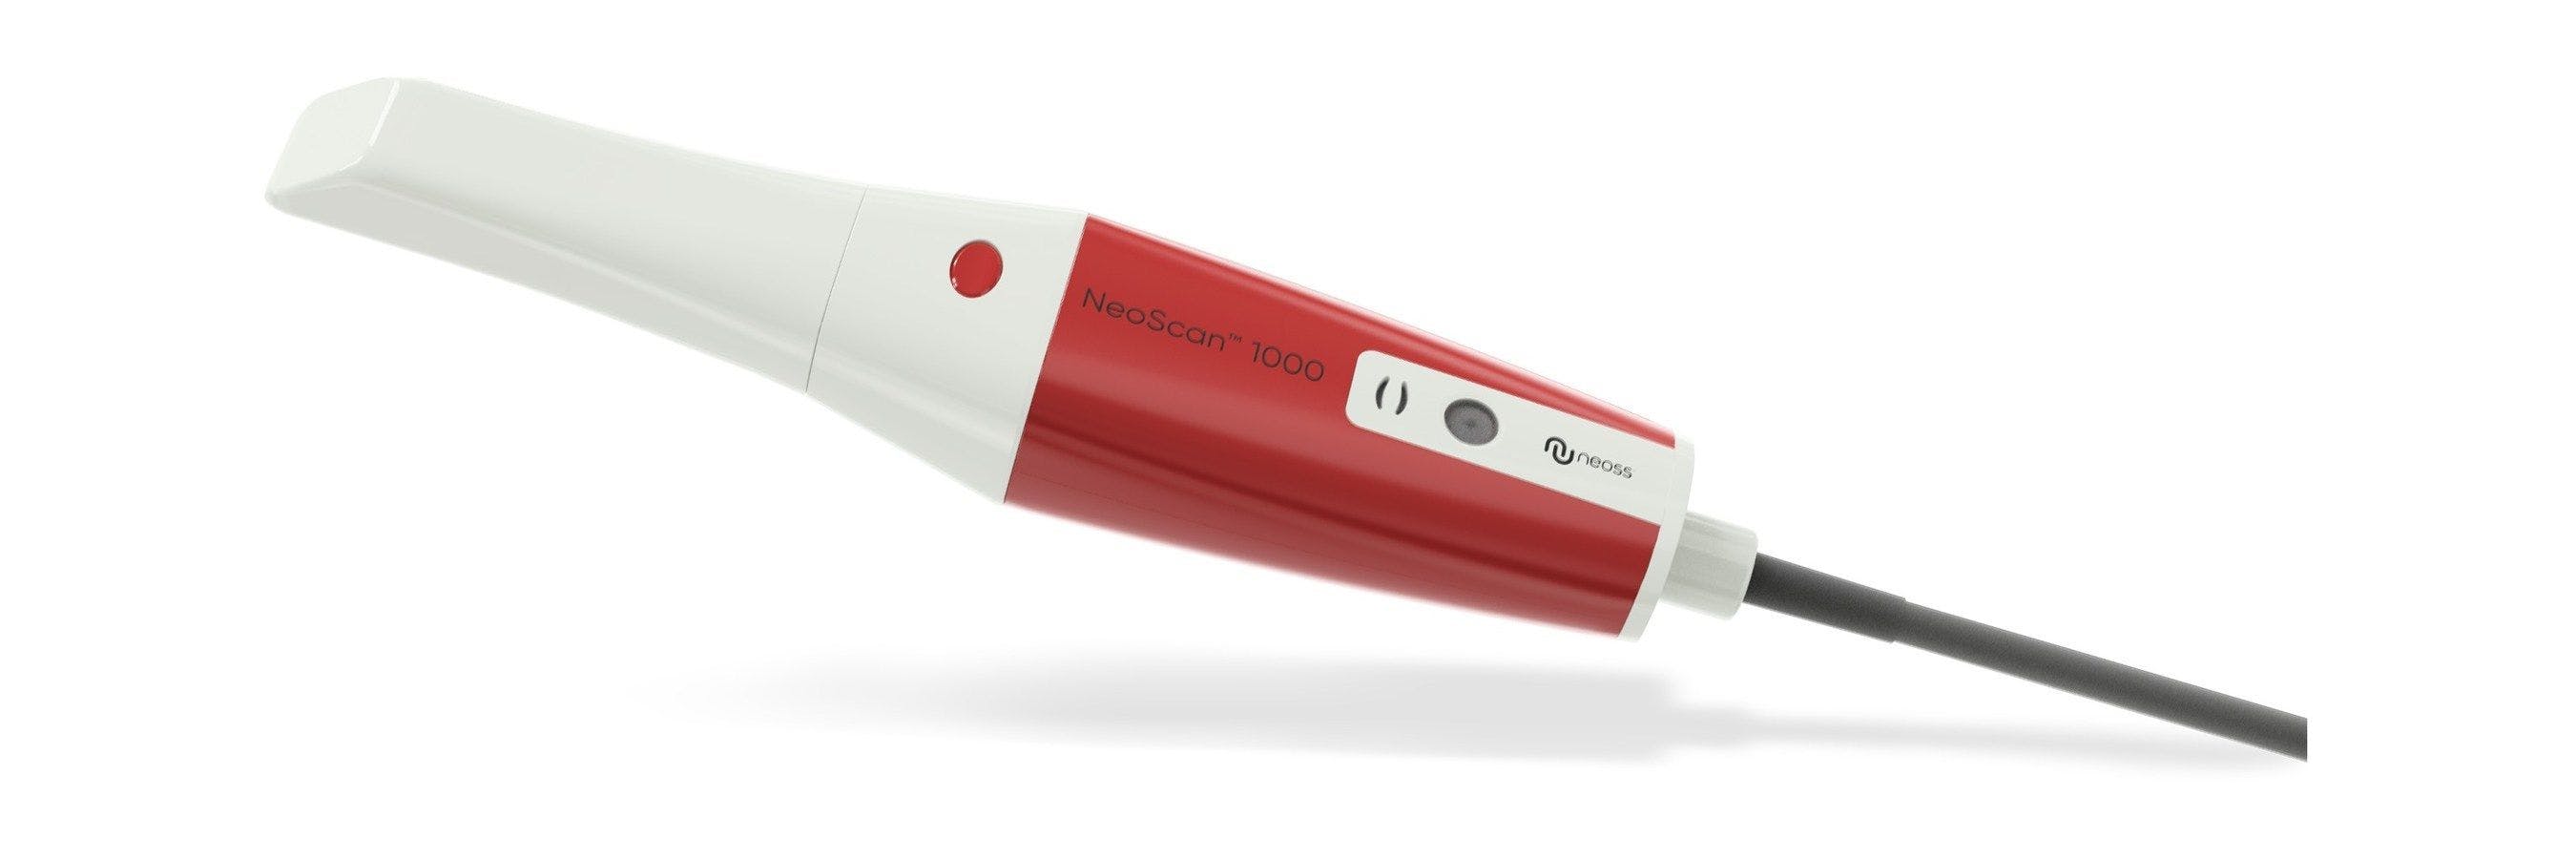 NeoScan 1000 intraoral scanner from Neoss Group.